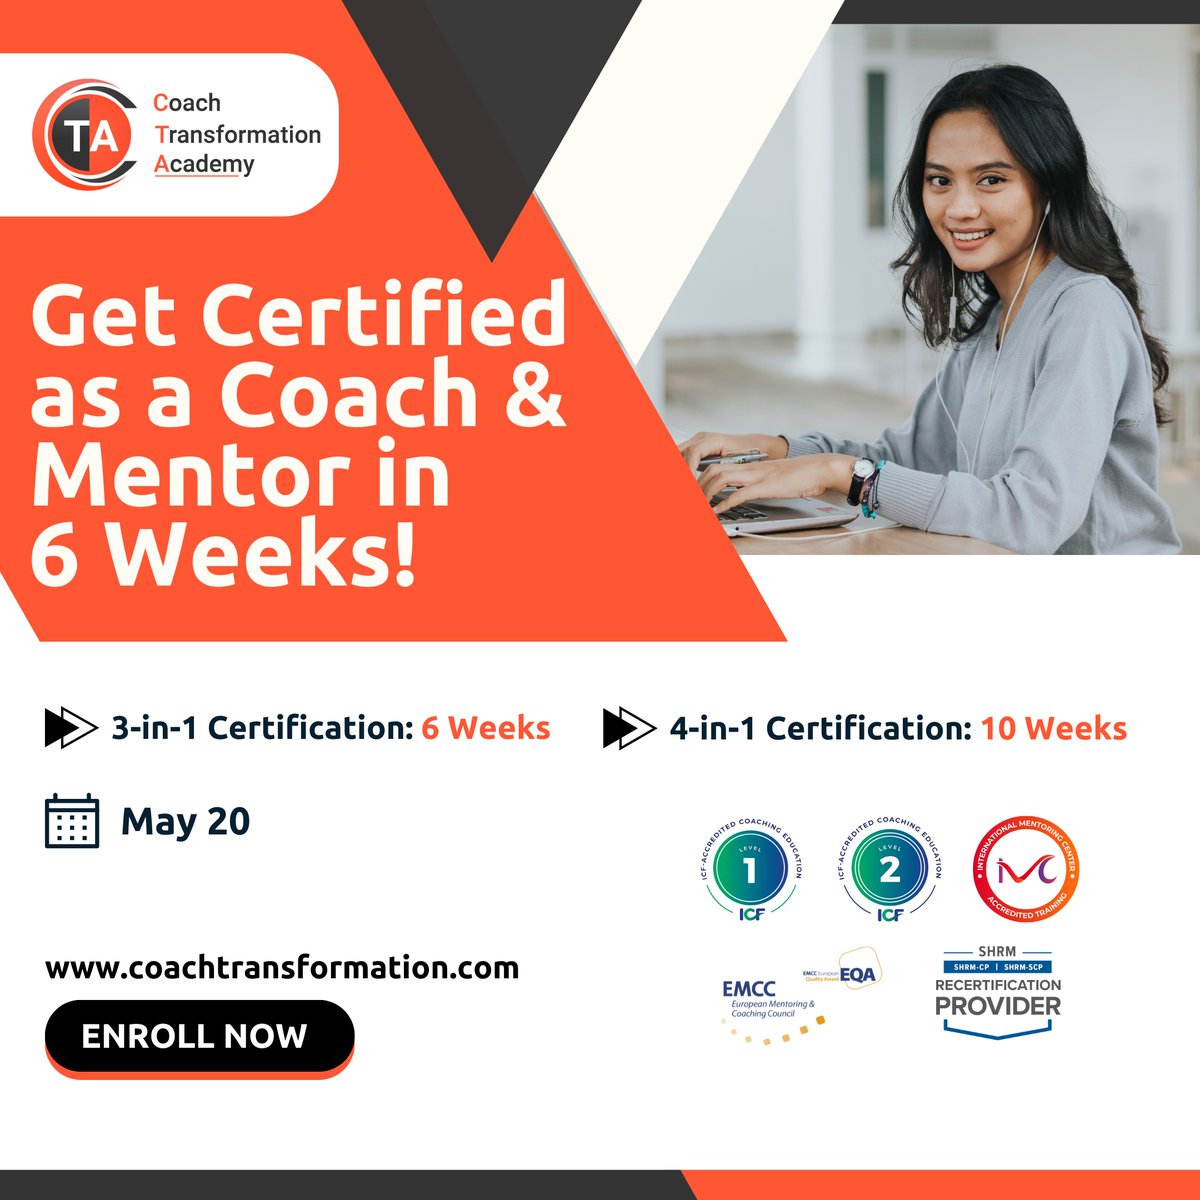 Don't miss out on your chance to become a certified coach and mentor! Our weekly workshop starts May 20. Secure your spot today and transform your career: zurl.co/INcH 

#CoachTransformation #CochCertification #MentorCertification #CareerGrowth #BusinessIdeas